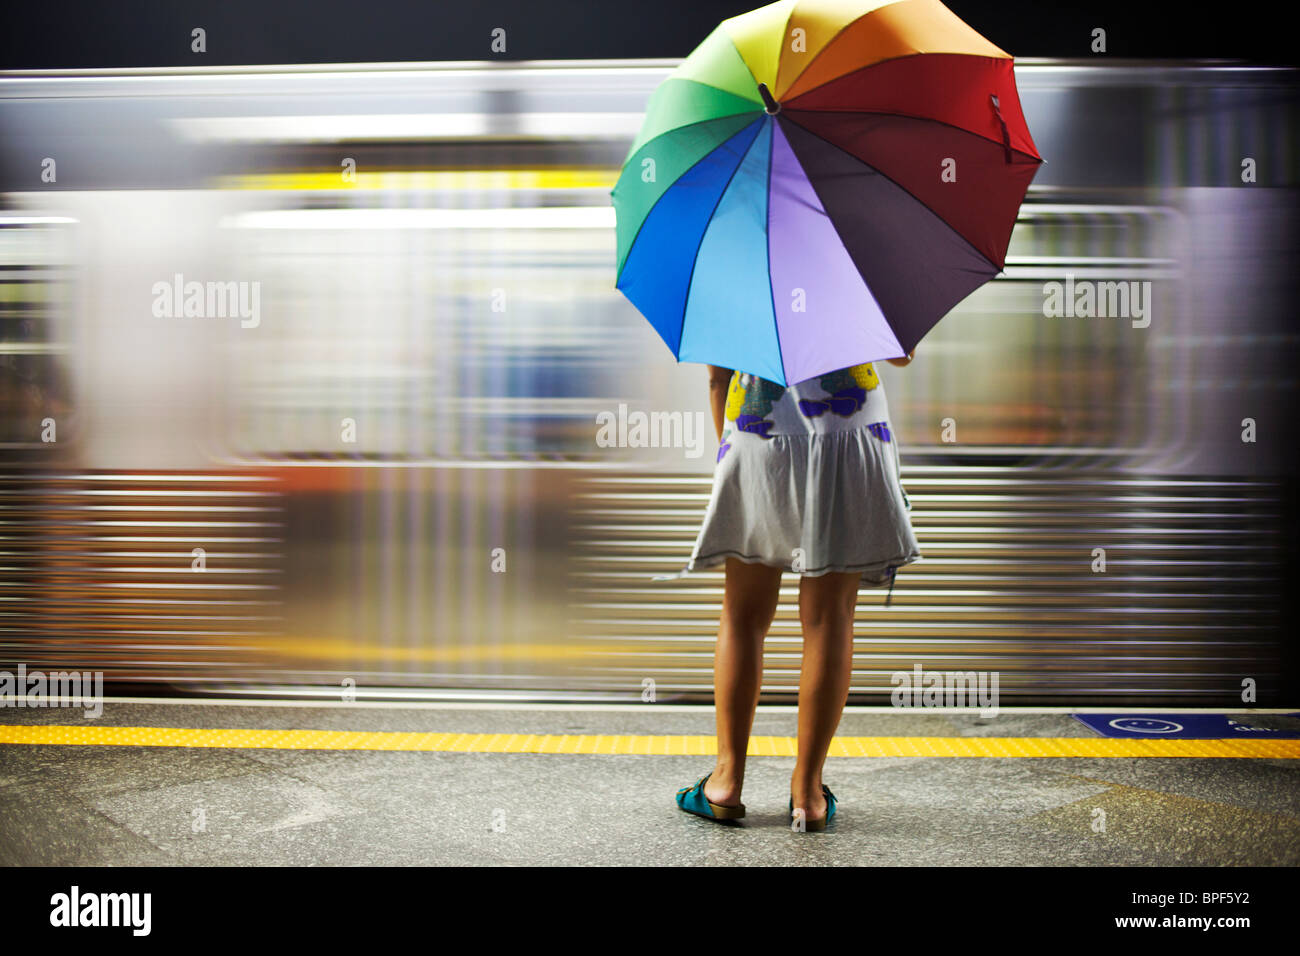 Mixed Race woman with umbrella on train platform Banque D'Images